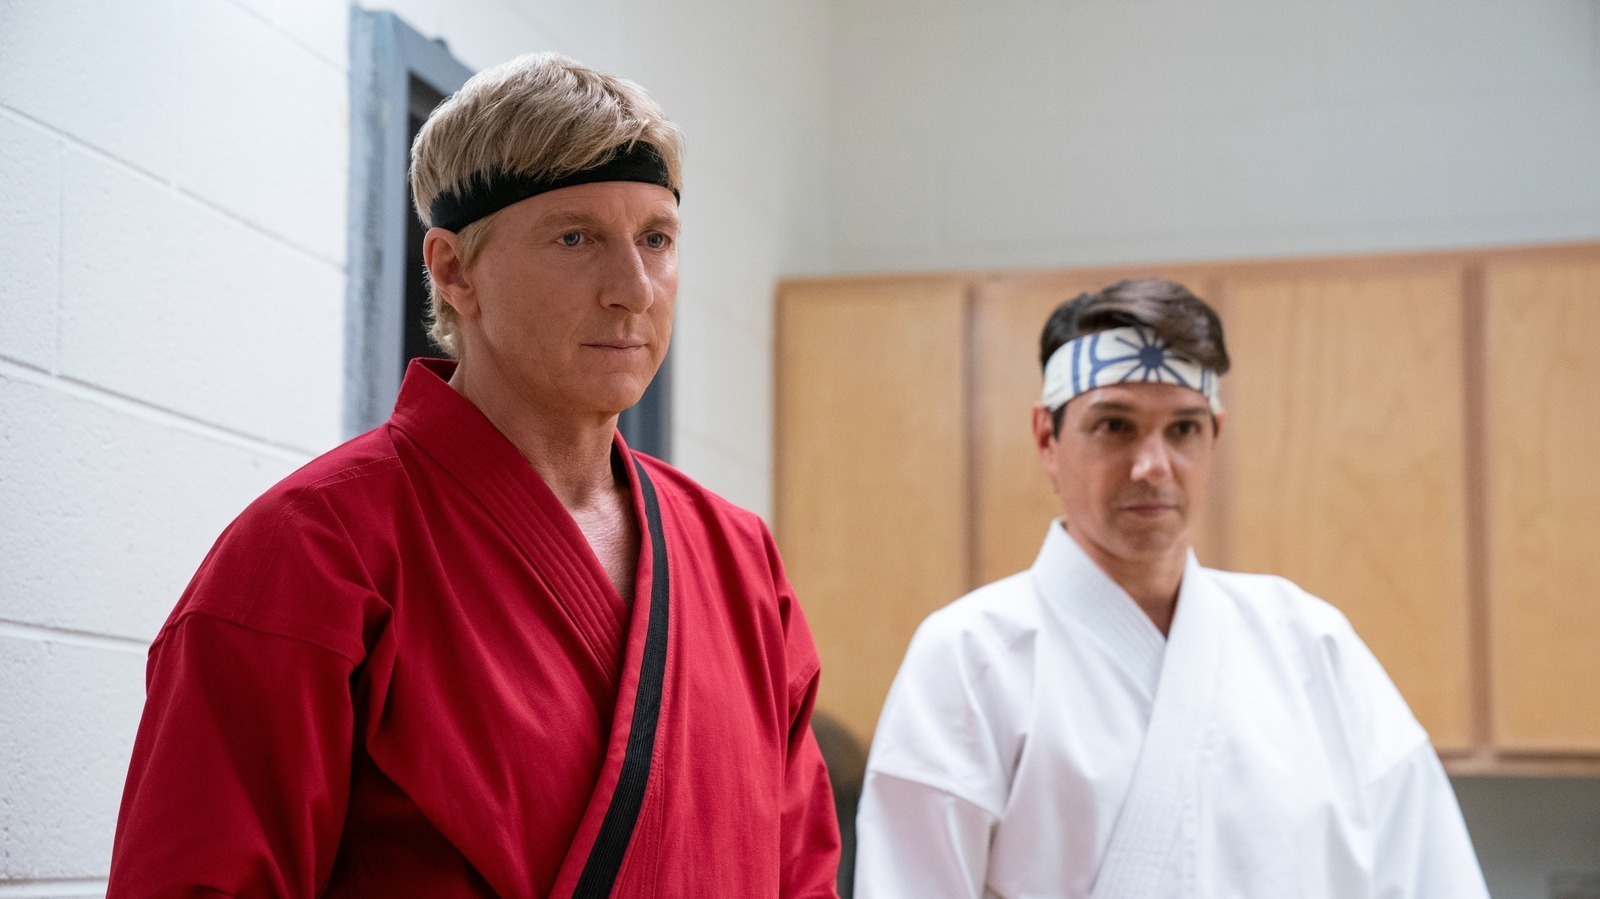 The Cobra Kai Cast's Real-Life Ages And Partners